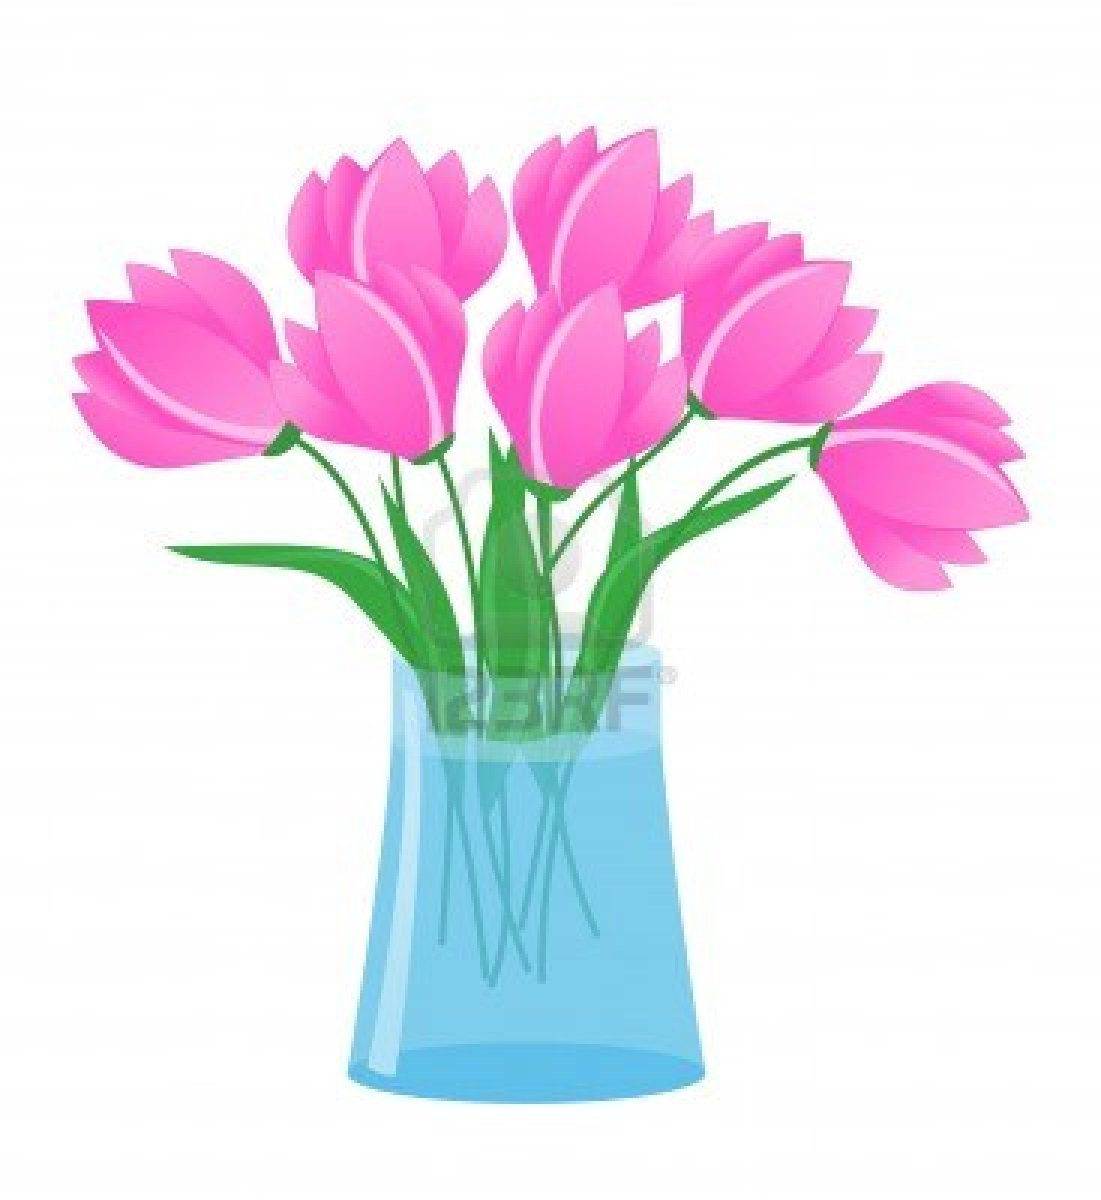 pink mercury glass vase of vases design ideas vase of flowers national gallery of art pictures inside amazing flower clipart kid vase with flowers purple color of tulips will keep alive on the